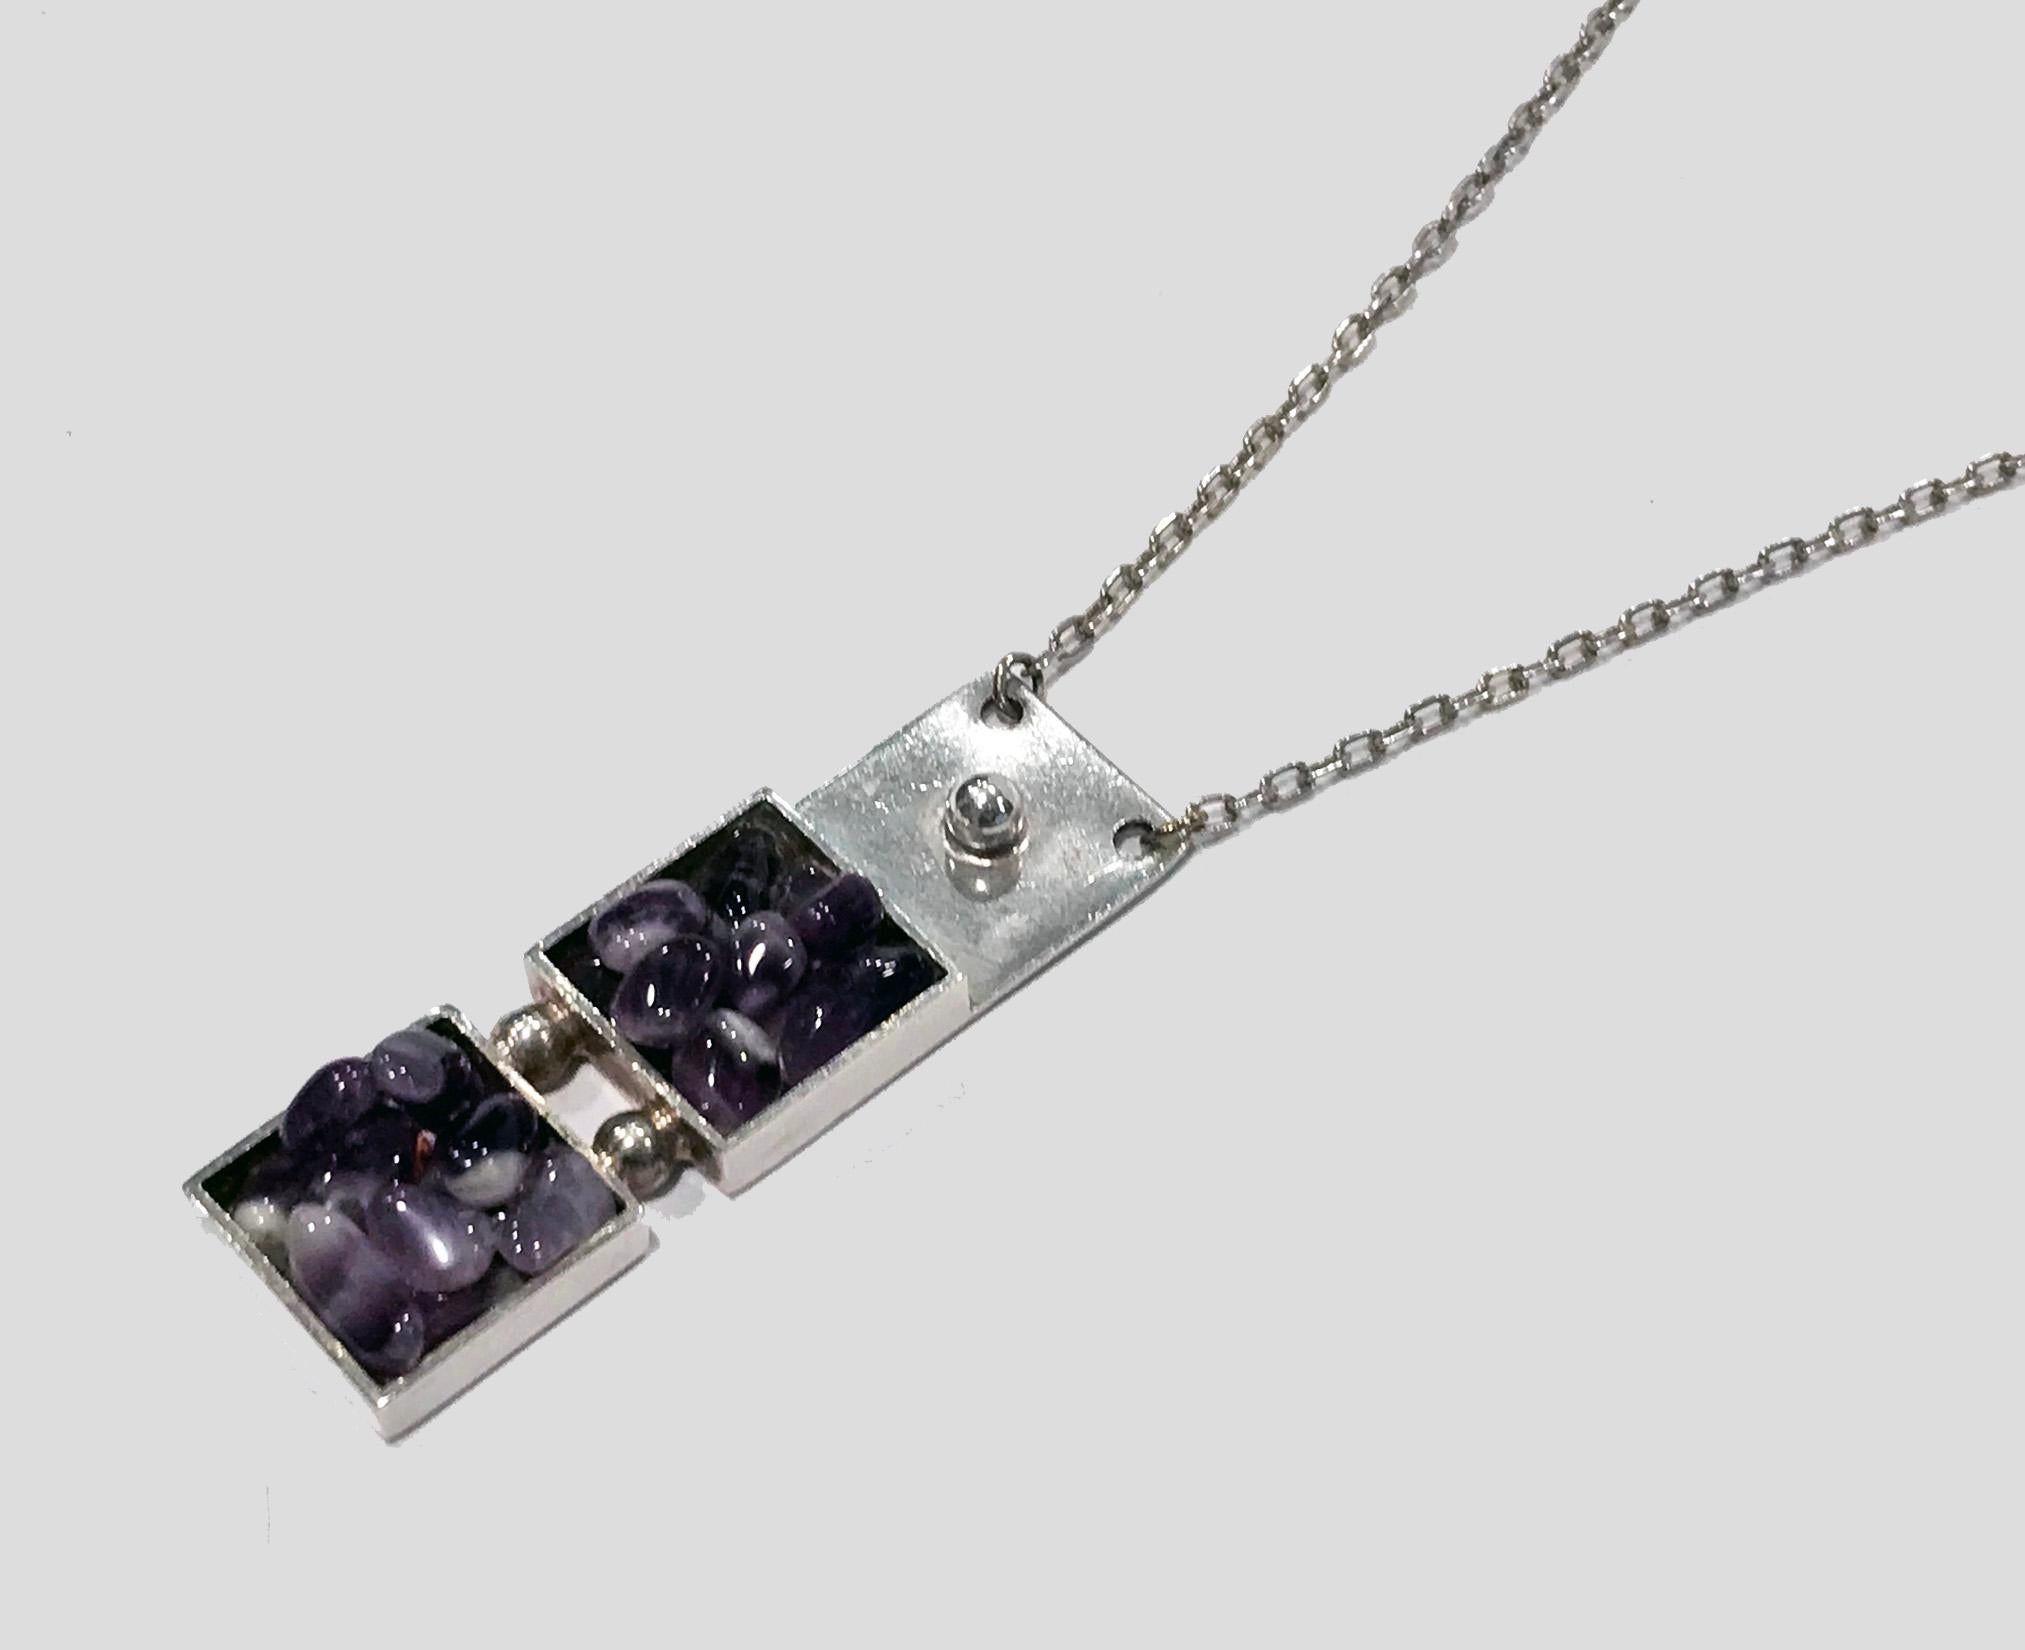 1970's Scandinavian Sterling Abstract Amethyst Quartz Crystal Necklace Pendant, Dansk Smykkekunst Denmark.The Necklace suspending a vertical square abstract design, two squares bezel set with numerous polished free form amethyst quartz. Sterling